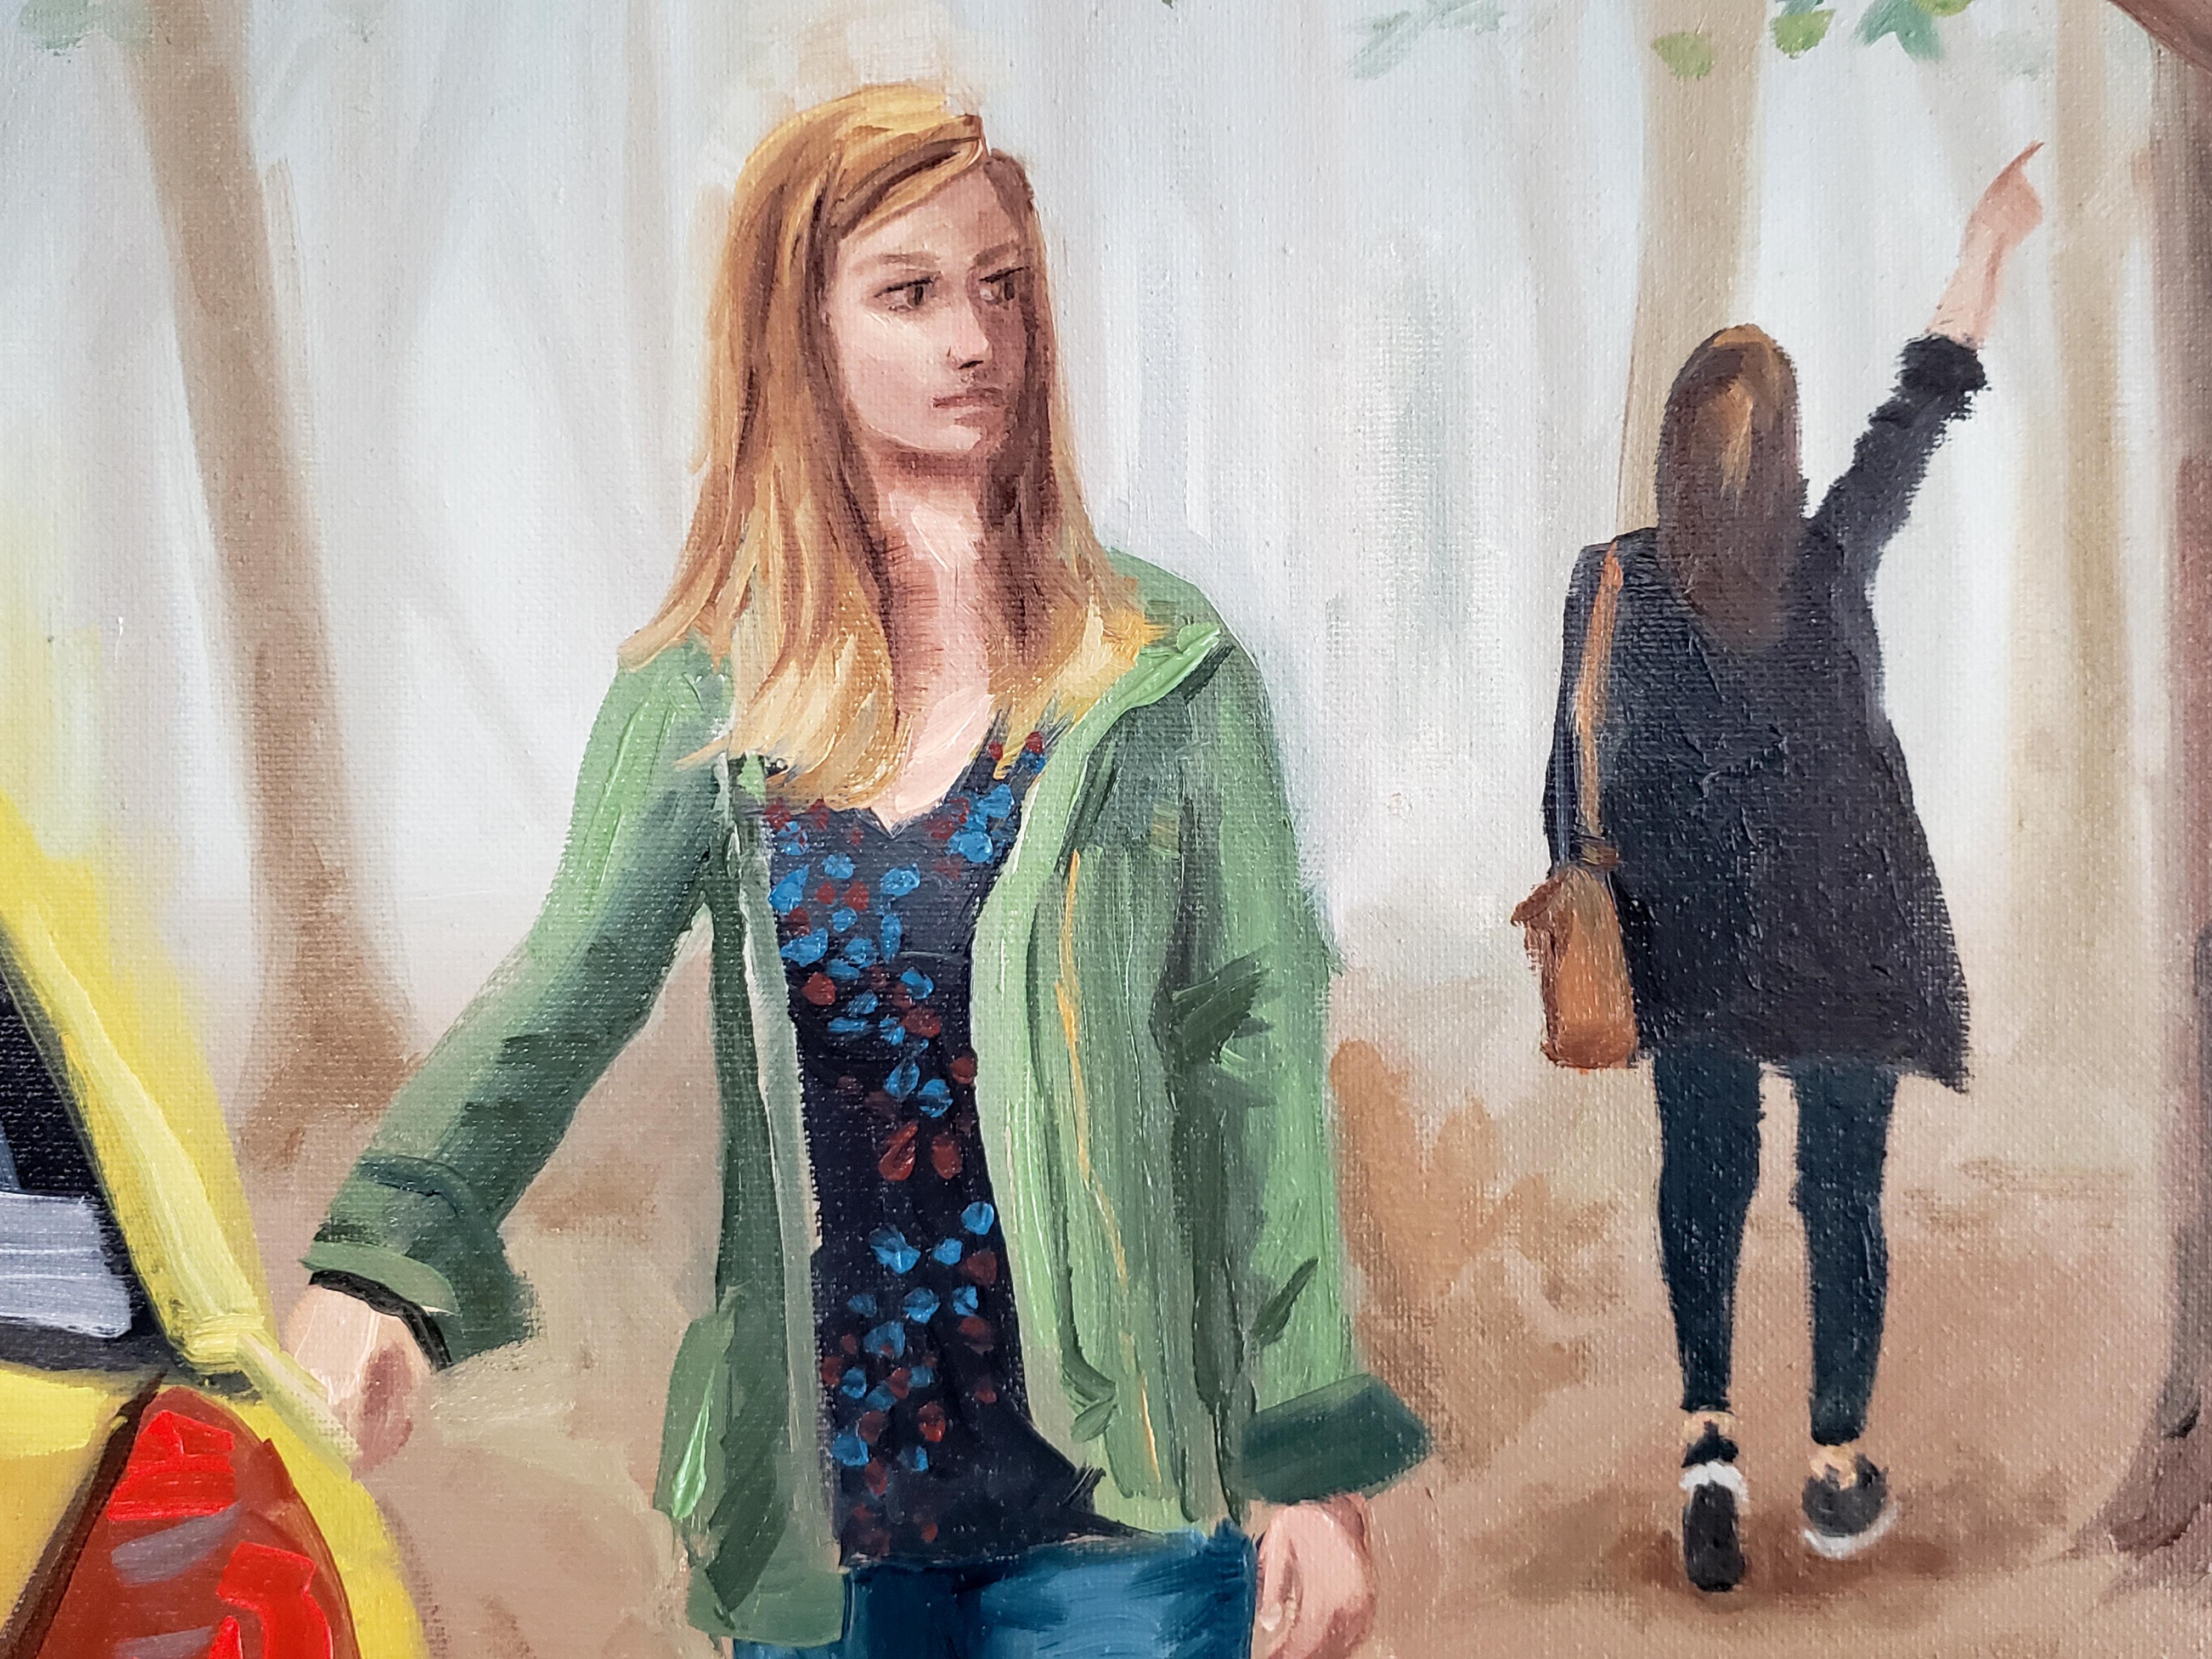 <p>Artist Comments<br />In a quiet forest, a woman catches a taxi cab while another hails the next one. This painting brings together the city and nature in a surreal way.</p><br /><p>About the Artist<br />Michael Wedge works in a variety of